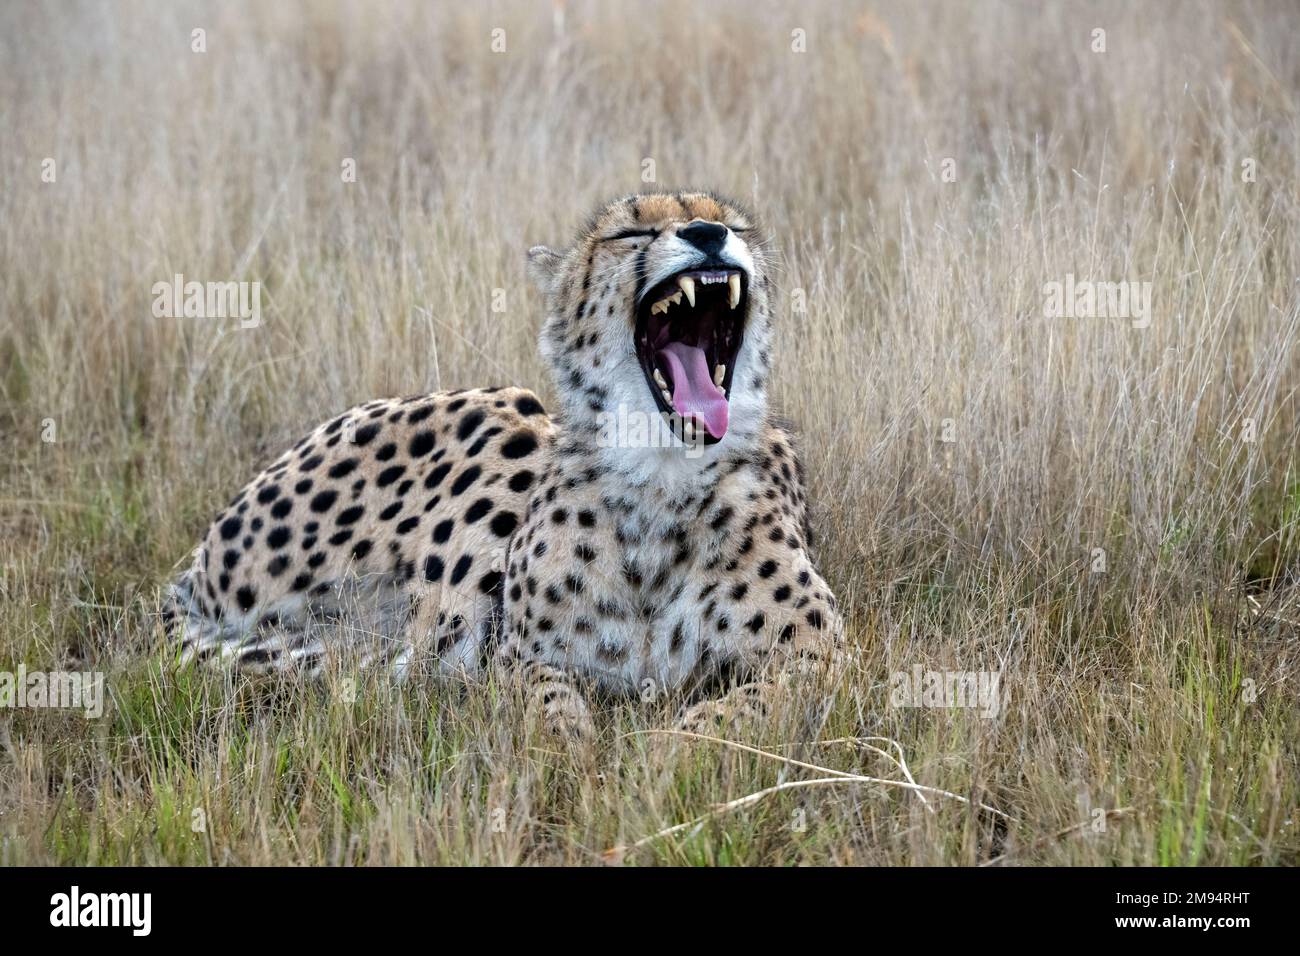 Cheetah Yawning Widely, Appearing to Laugh Stock Photo